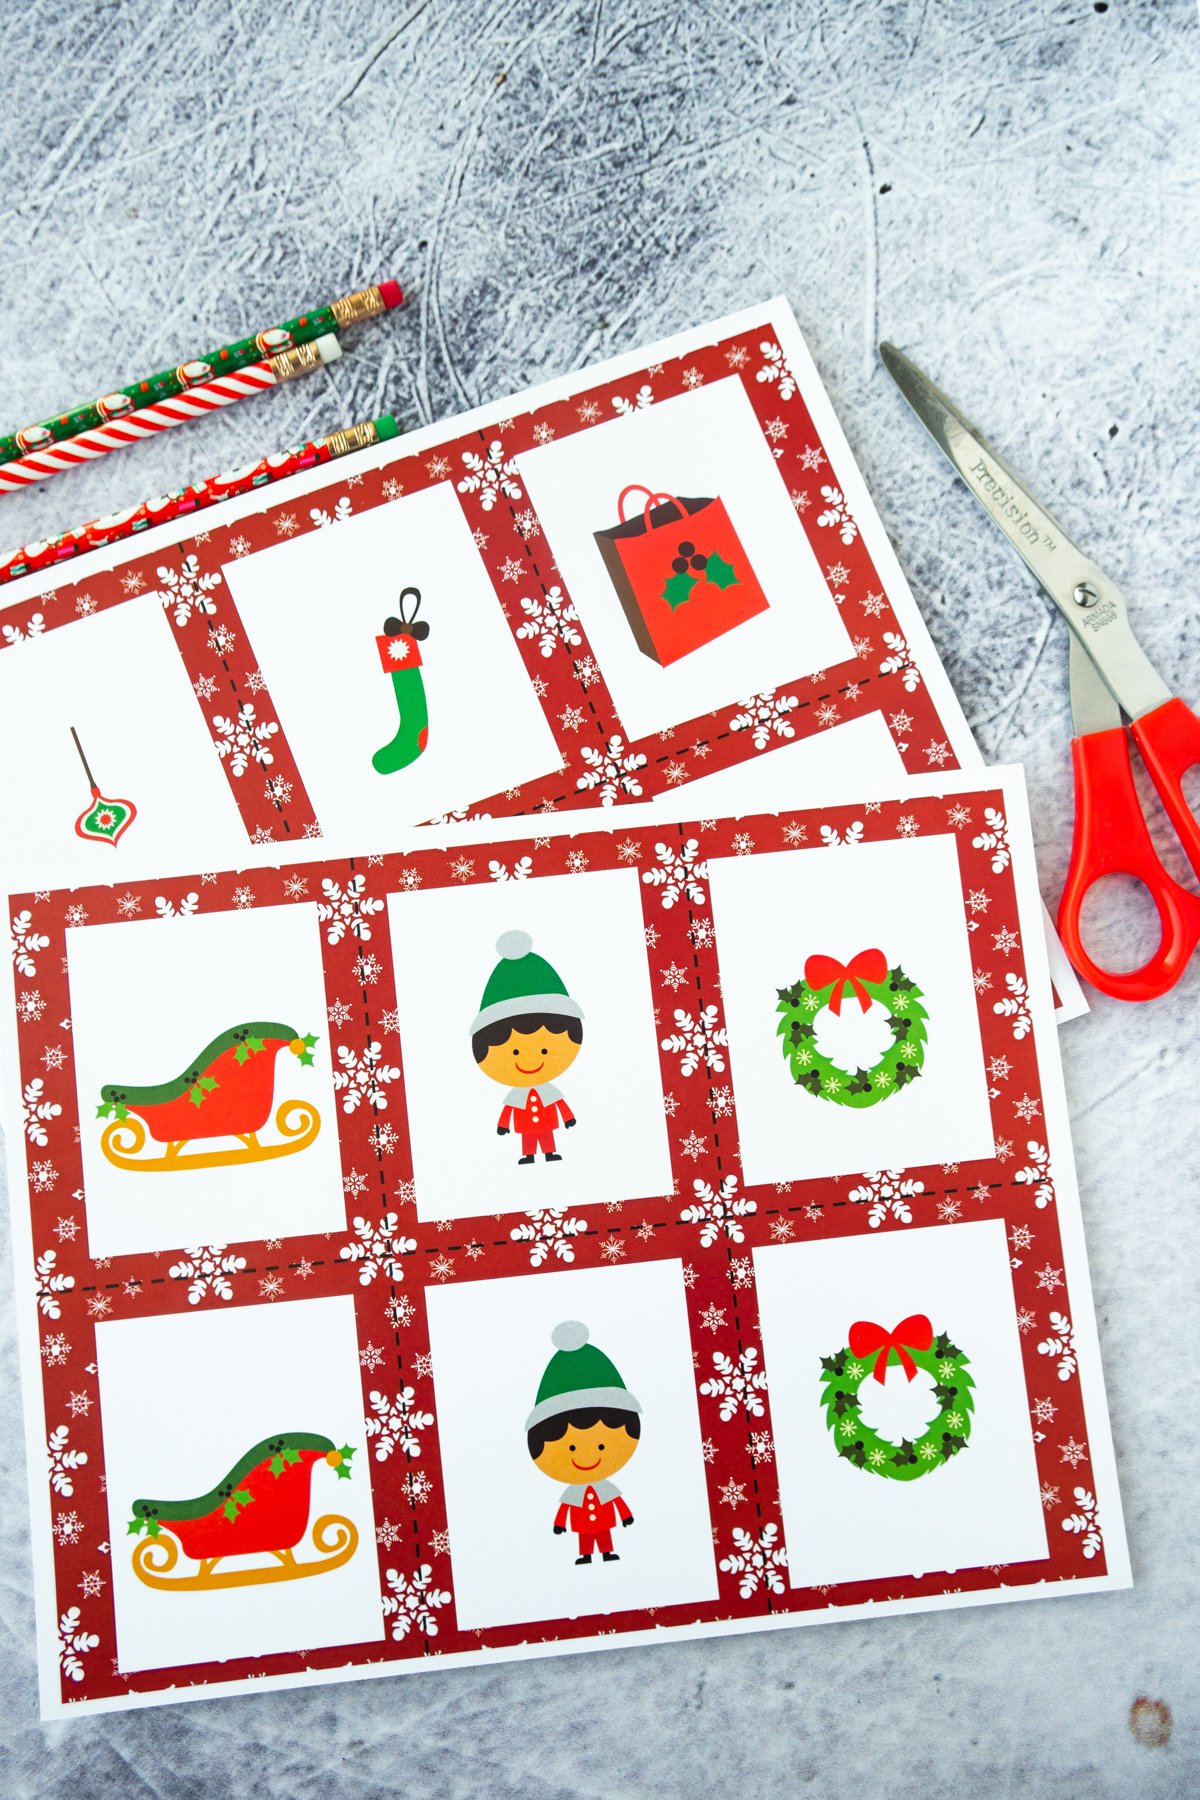 Christmas matching game cards printed out